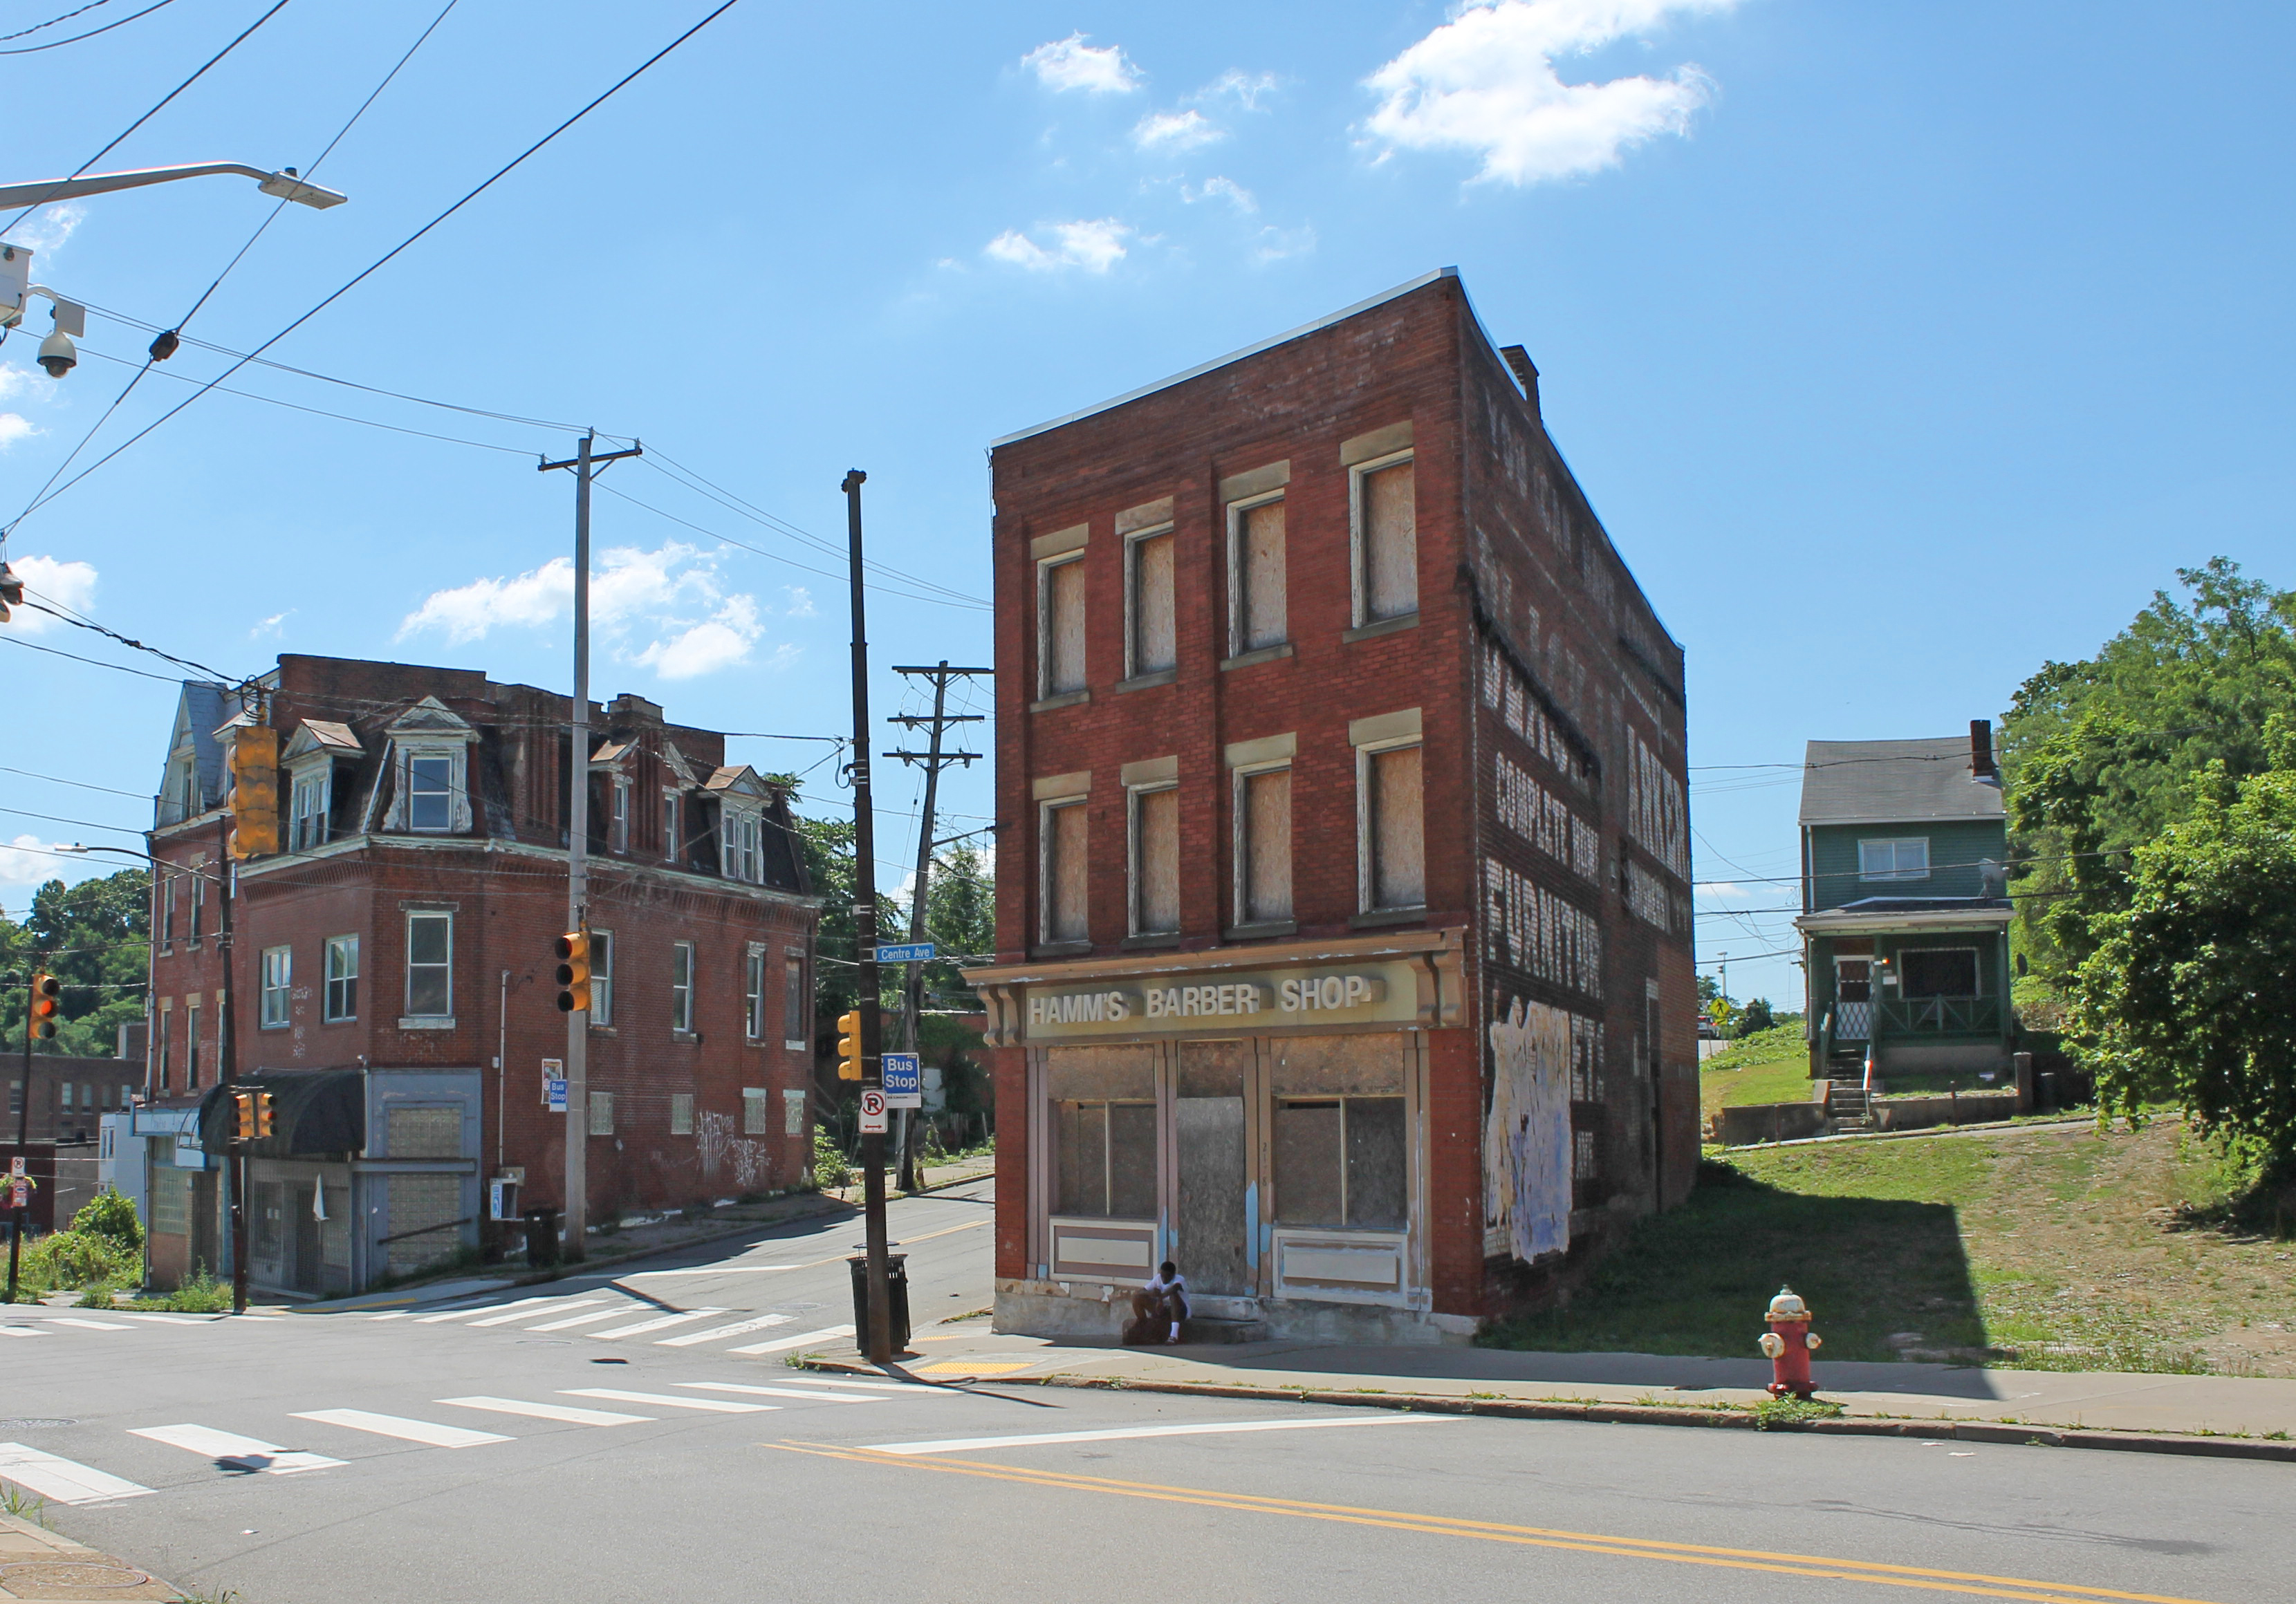 The former Hamm's Barber Shop building stands three-stories tall and boarded up on Centre Avenue in the Hill District.